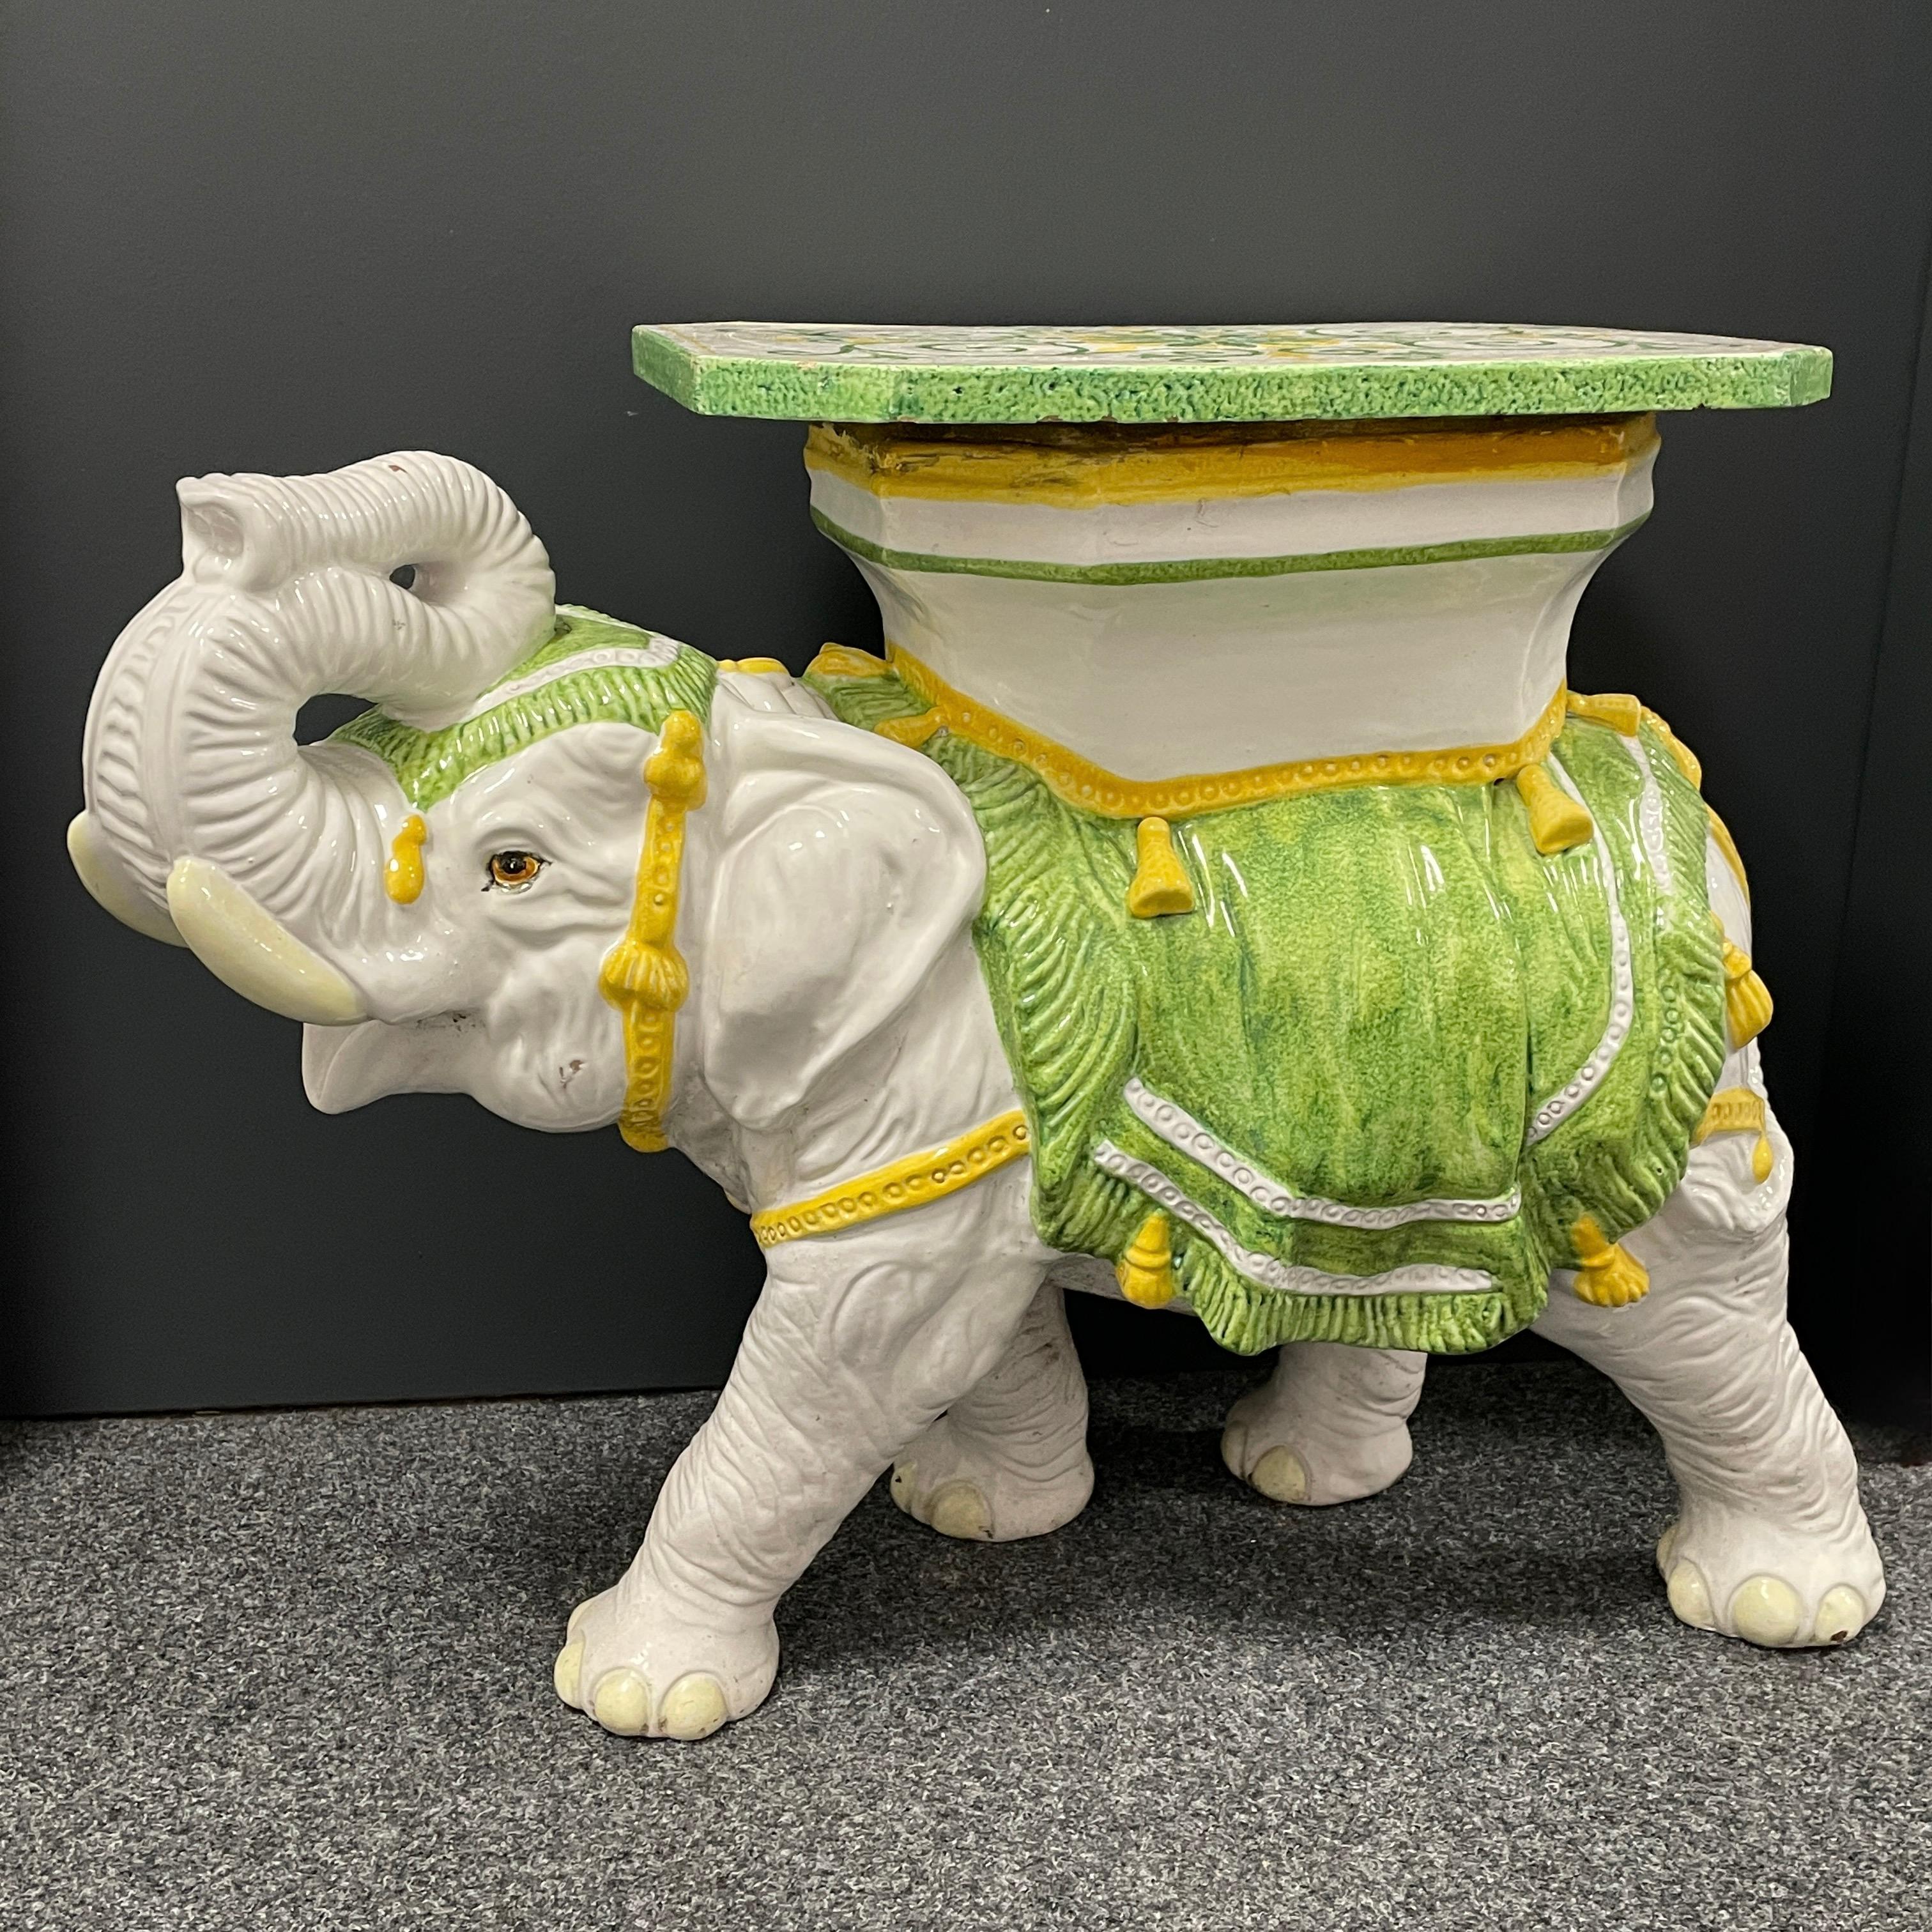 Mid-20th century glazed terracotta garden stool plant stand or seat, flower pot seat or side table. Handmade of terracotta. Vintage garden seat in the shape of an elephant with a pedestal top, all in cream white ceramic with yellow and green